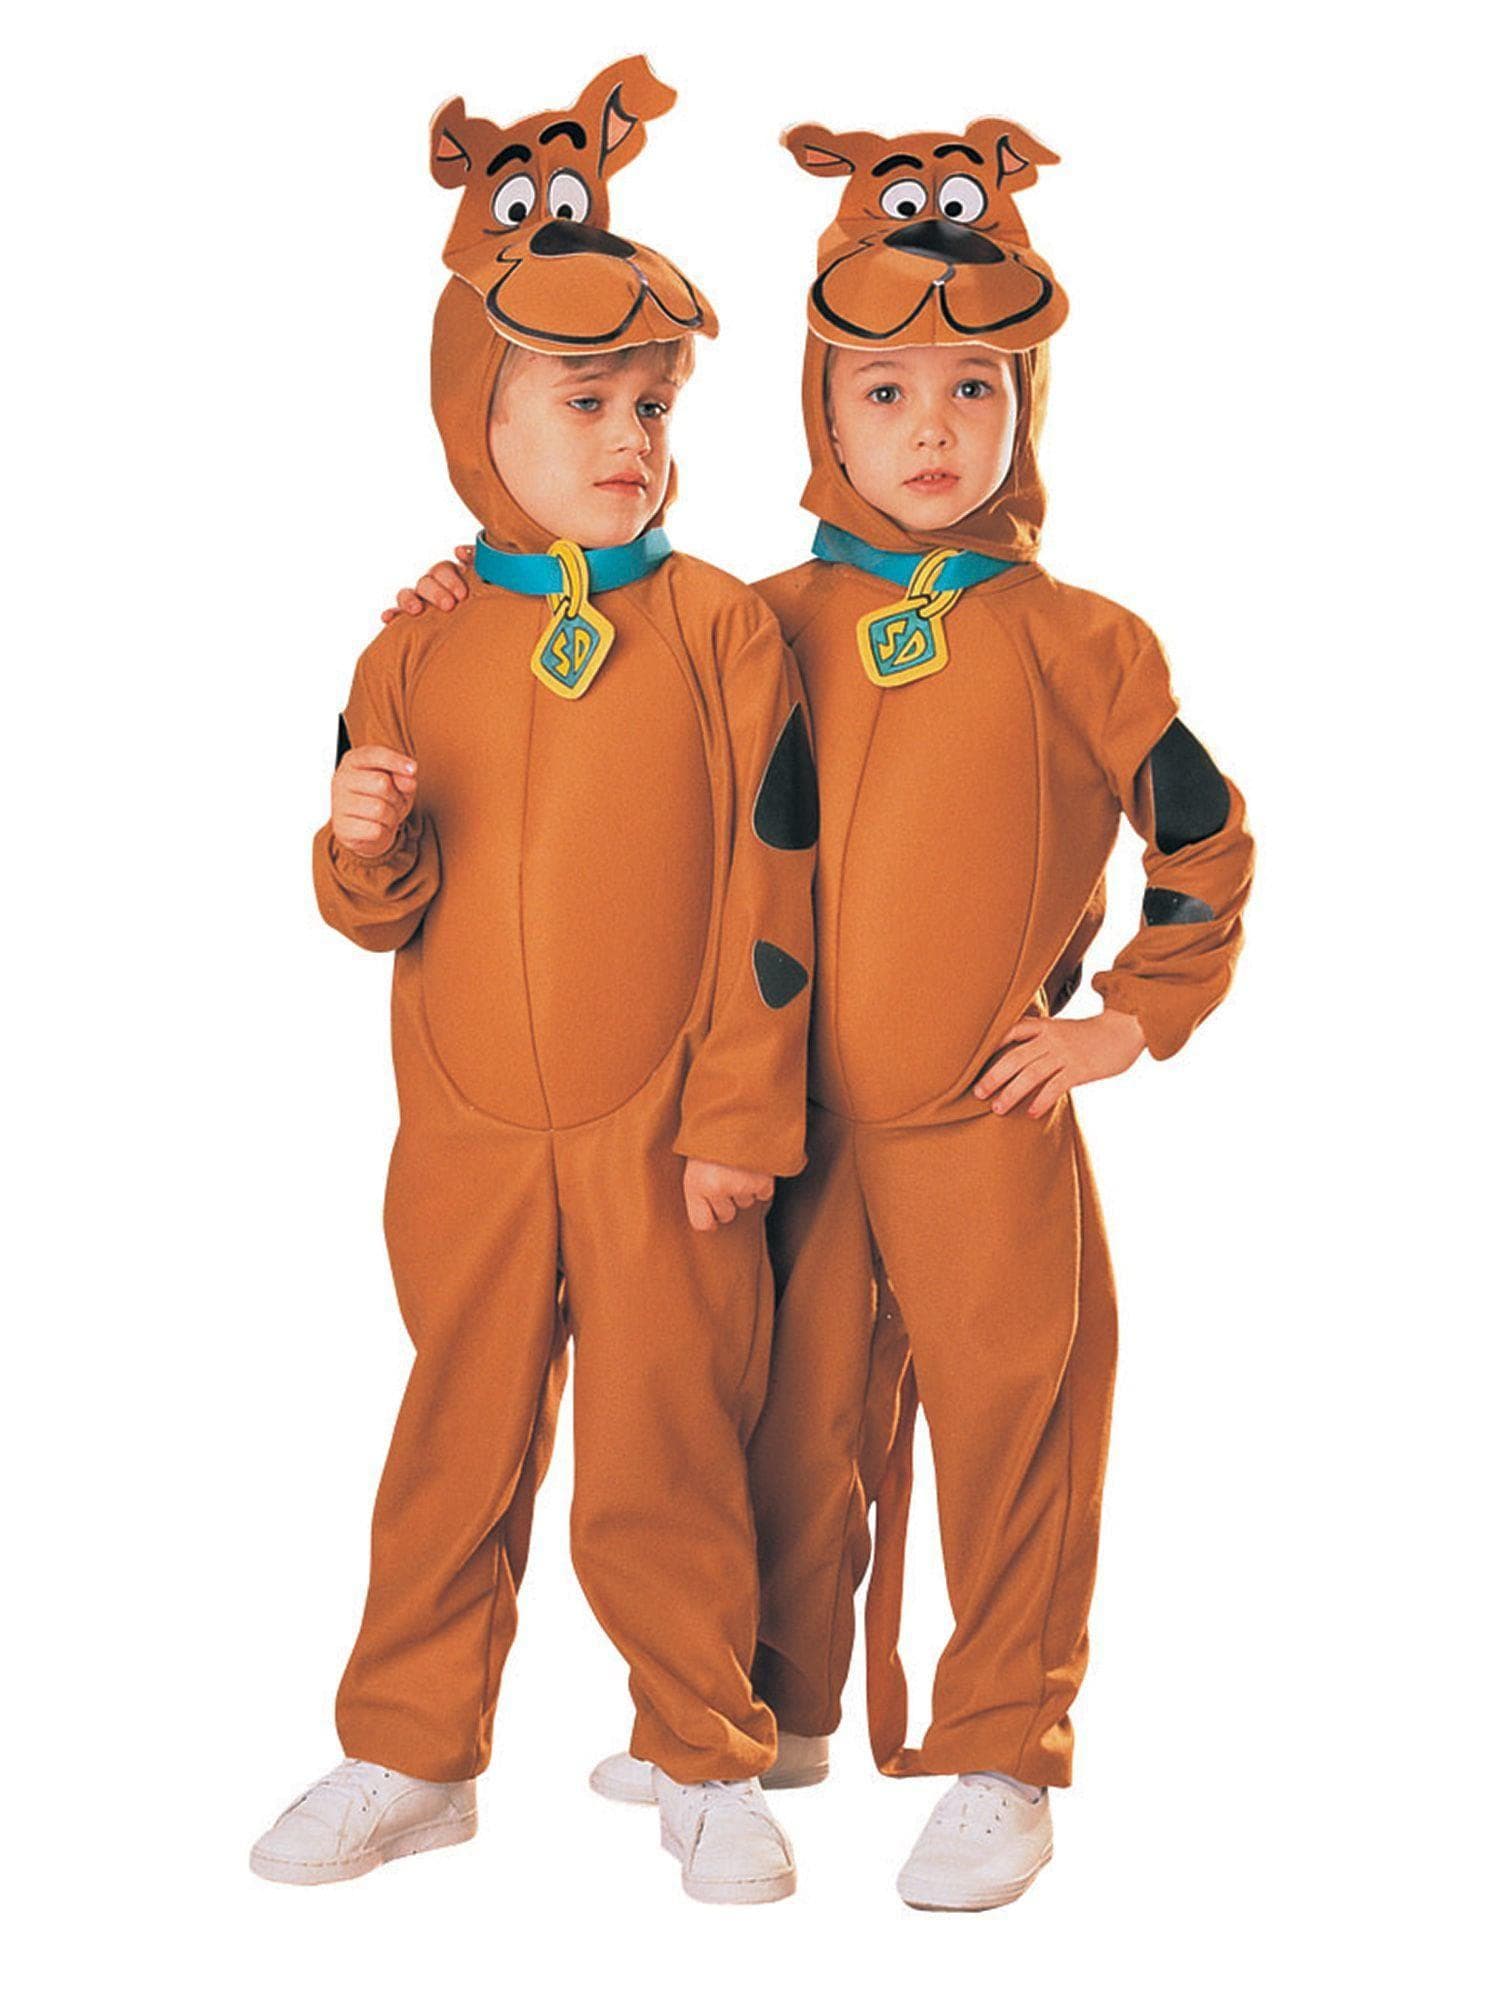 Scooby-Doo Costume for Toddlers - costumes.com